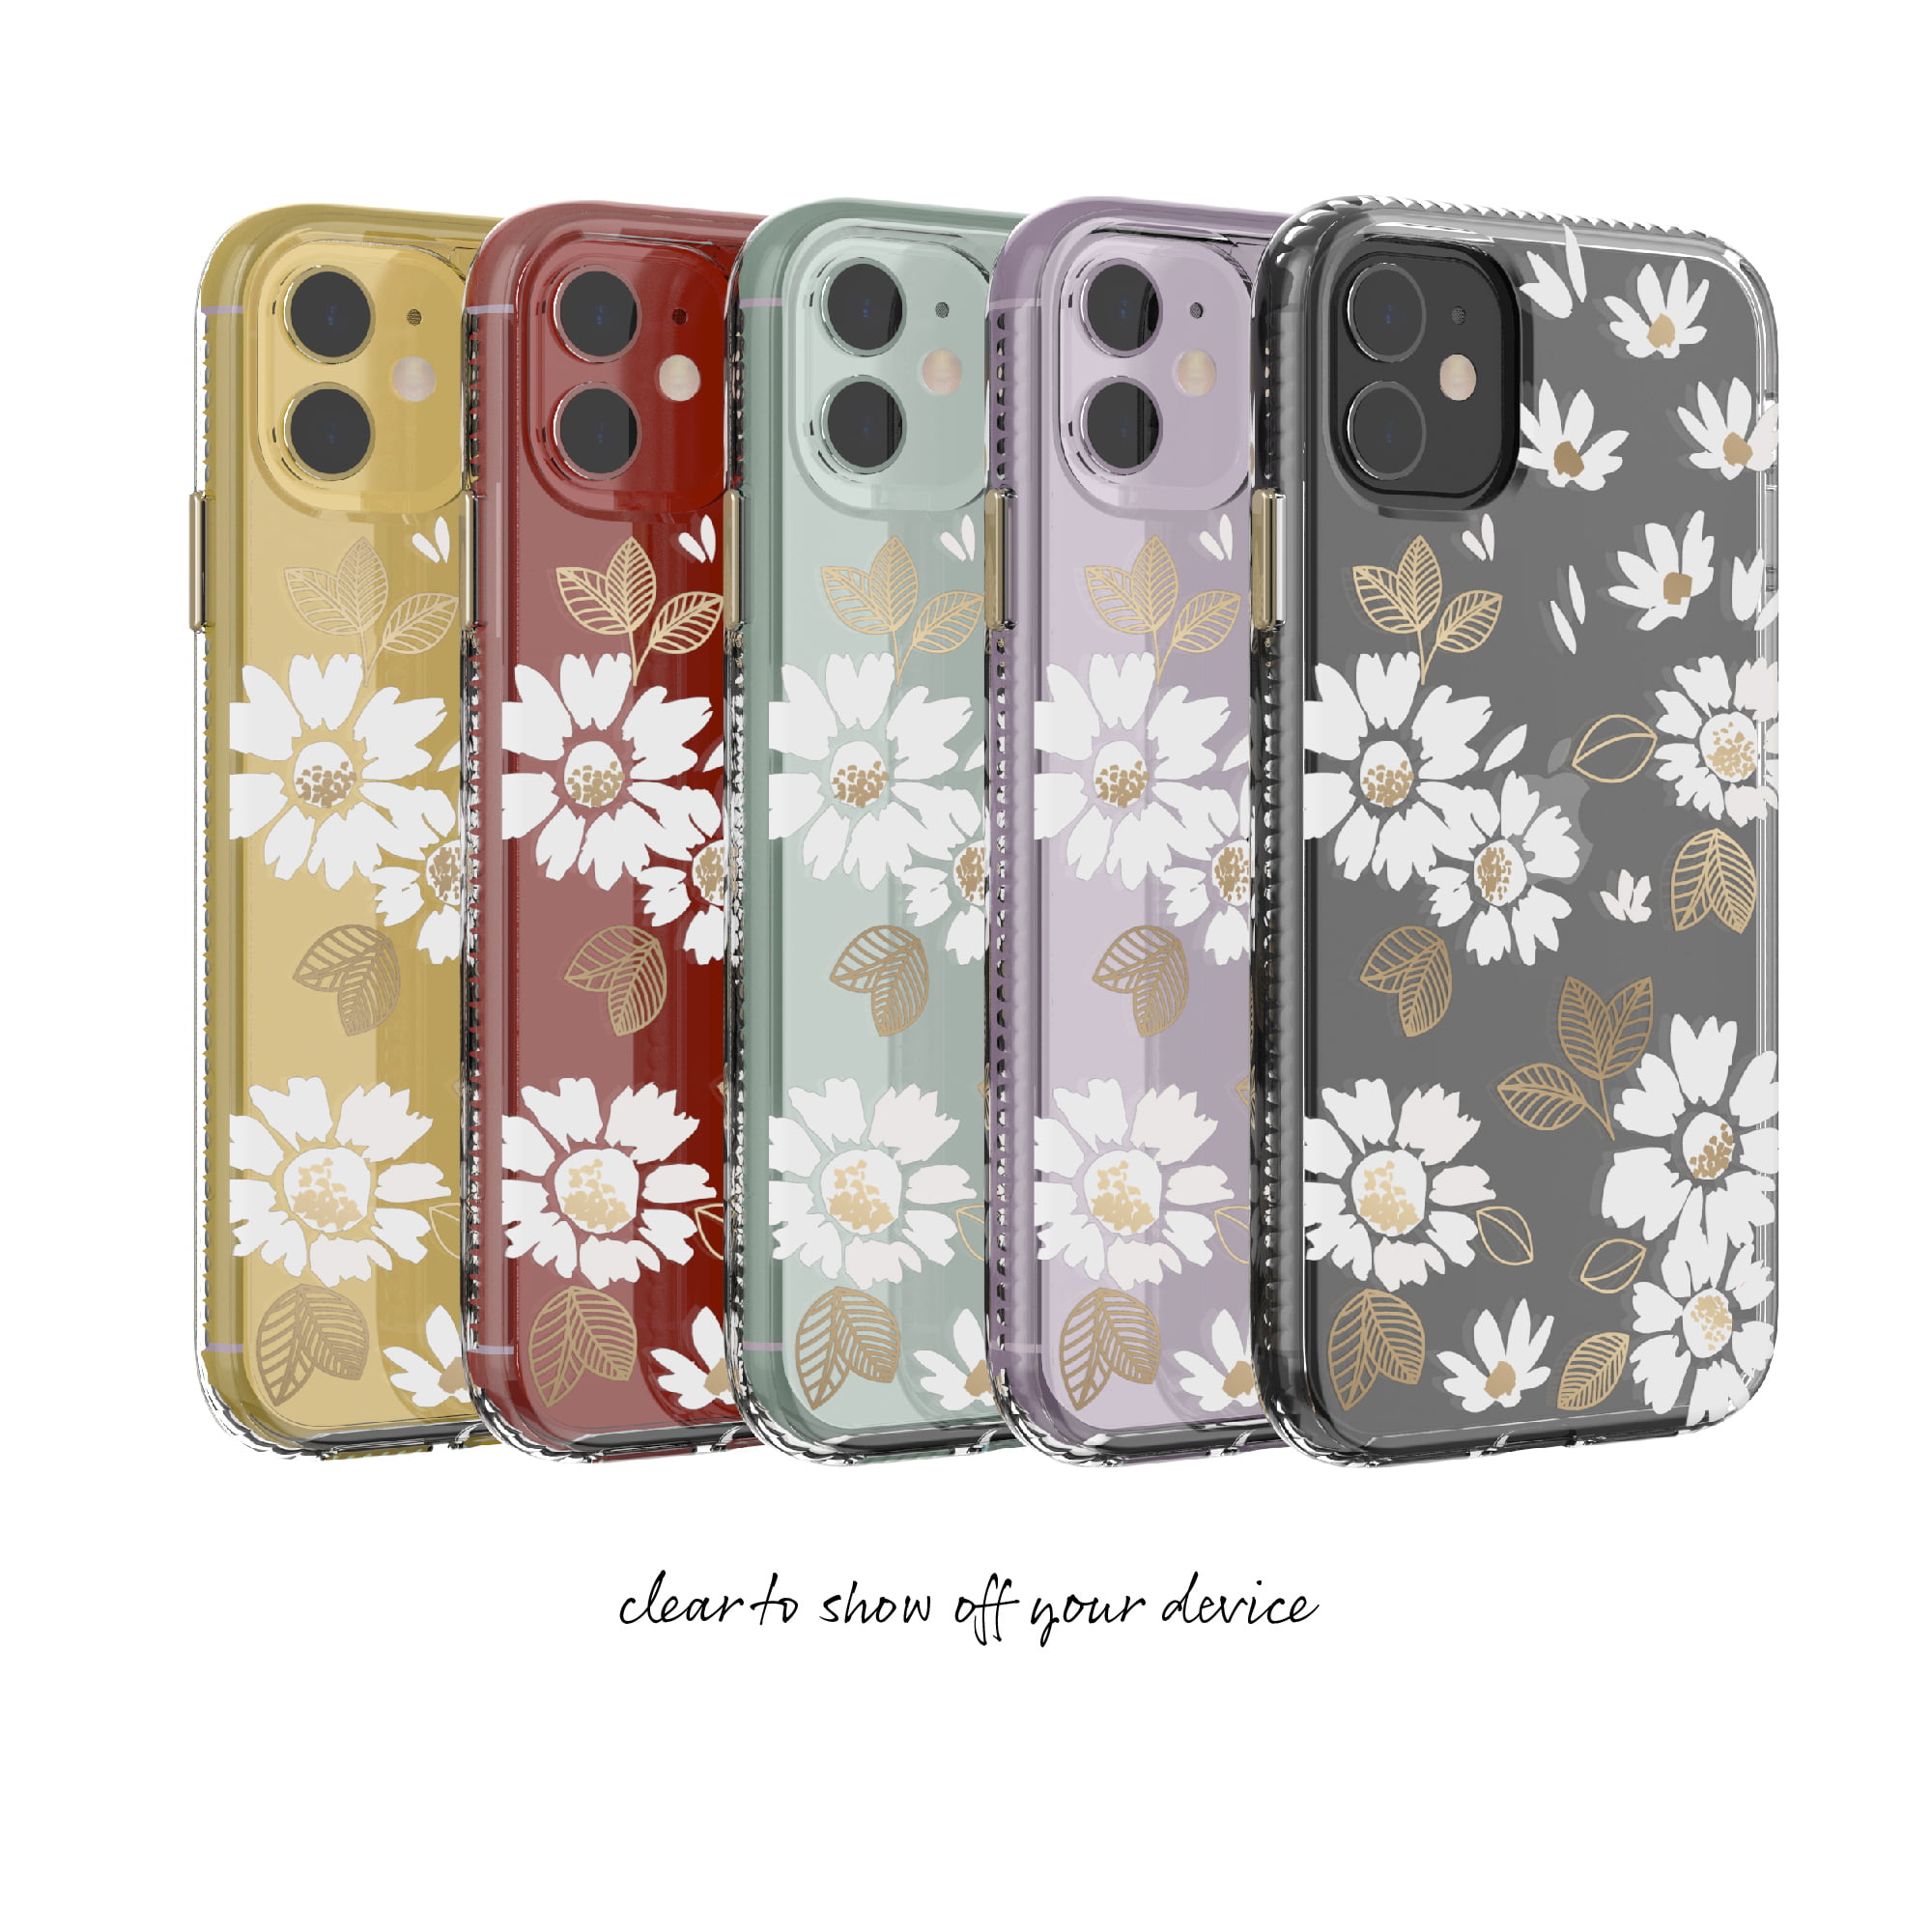 Clear White Floral Phone Case For Iphone 11 Iphone Xr Walmart Com Walmart Com